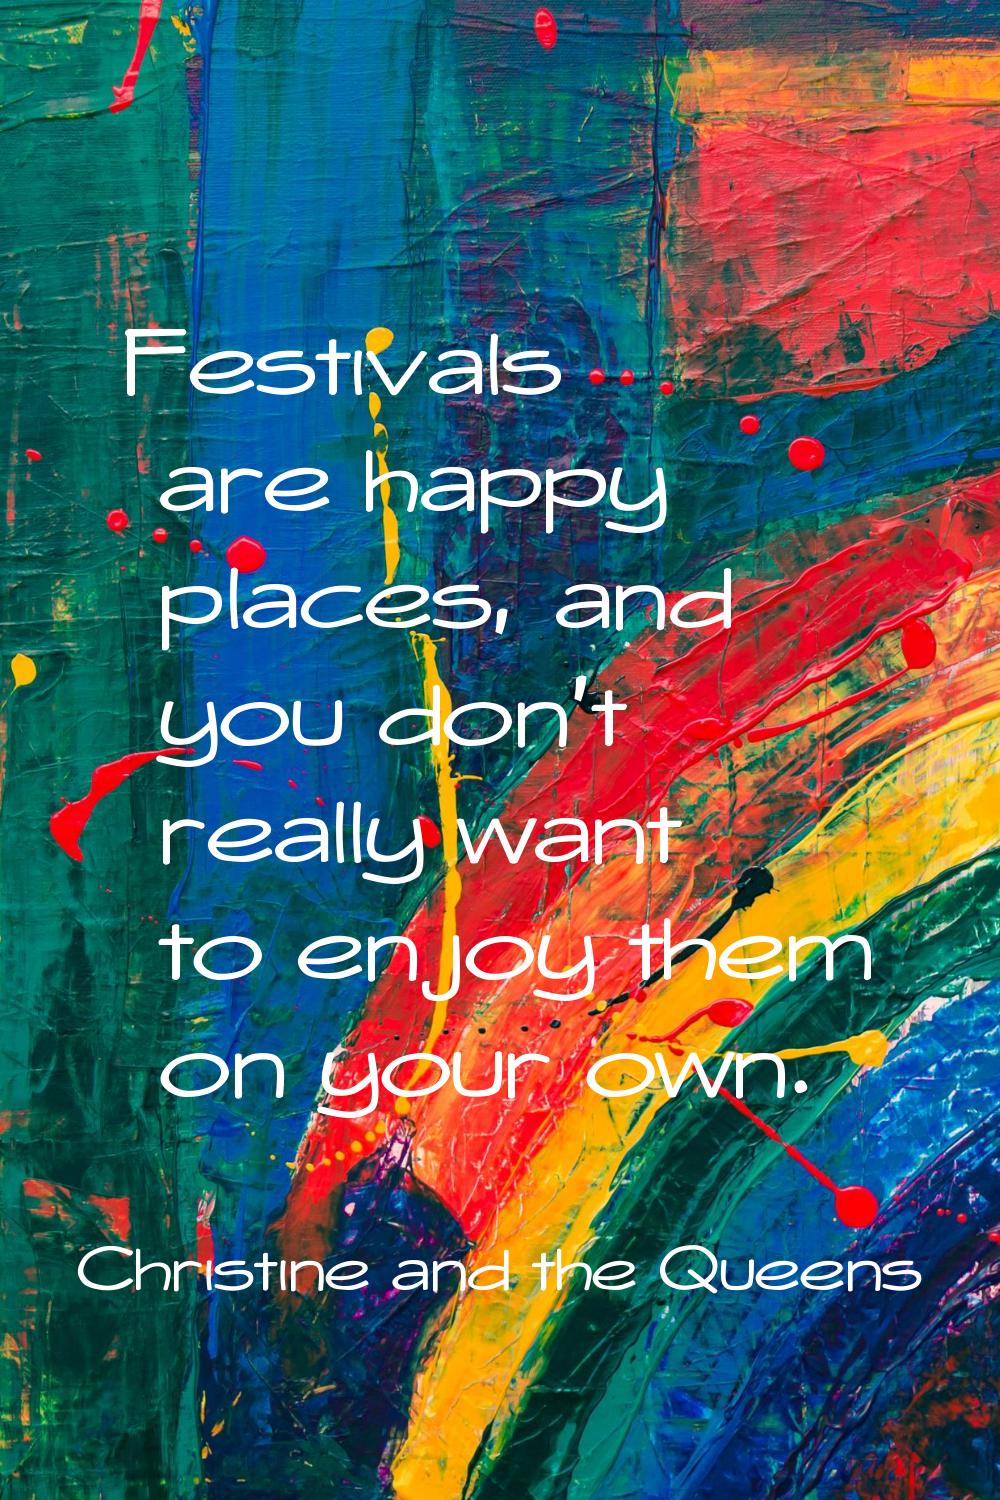 Festivals are happy places, and you don't really want to enjoy them on your own.